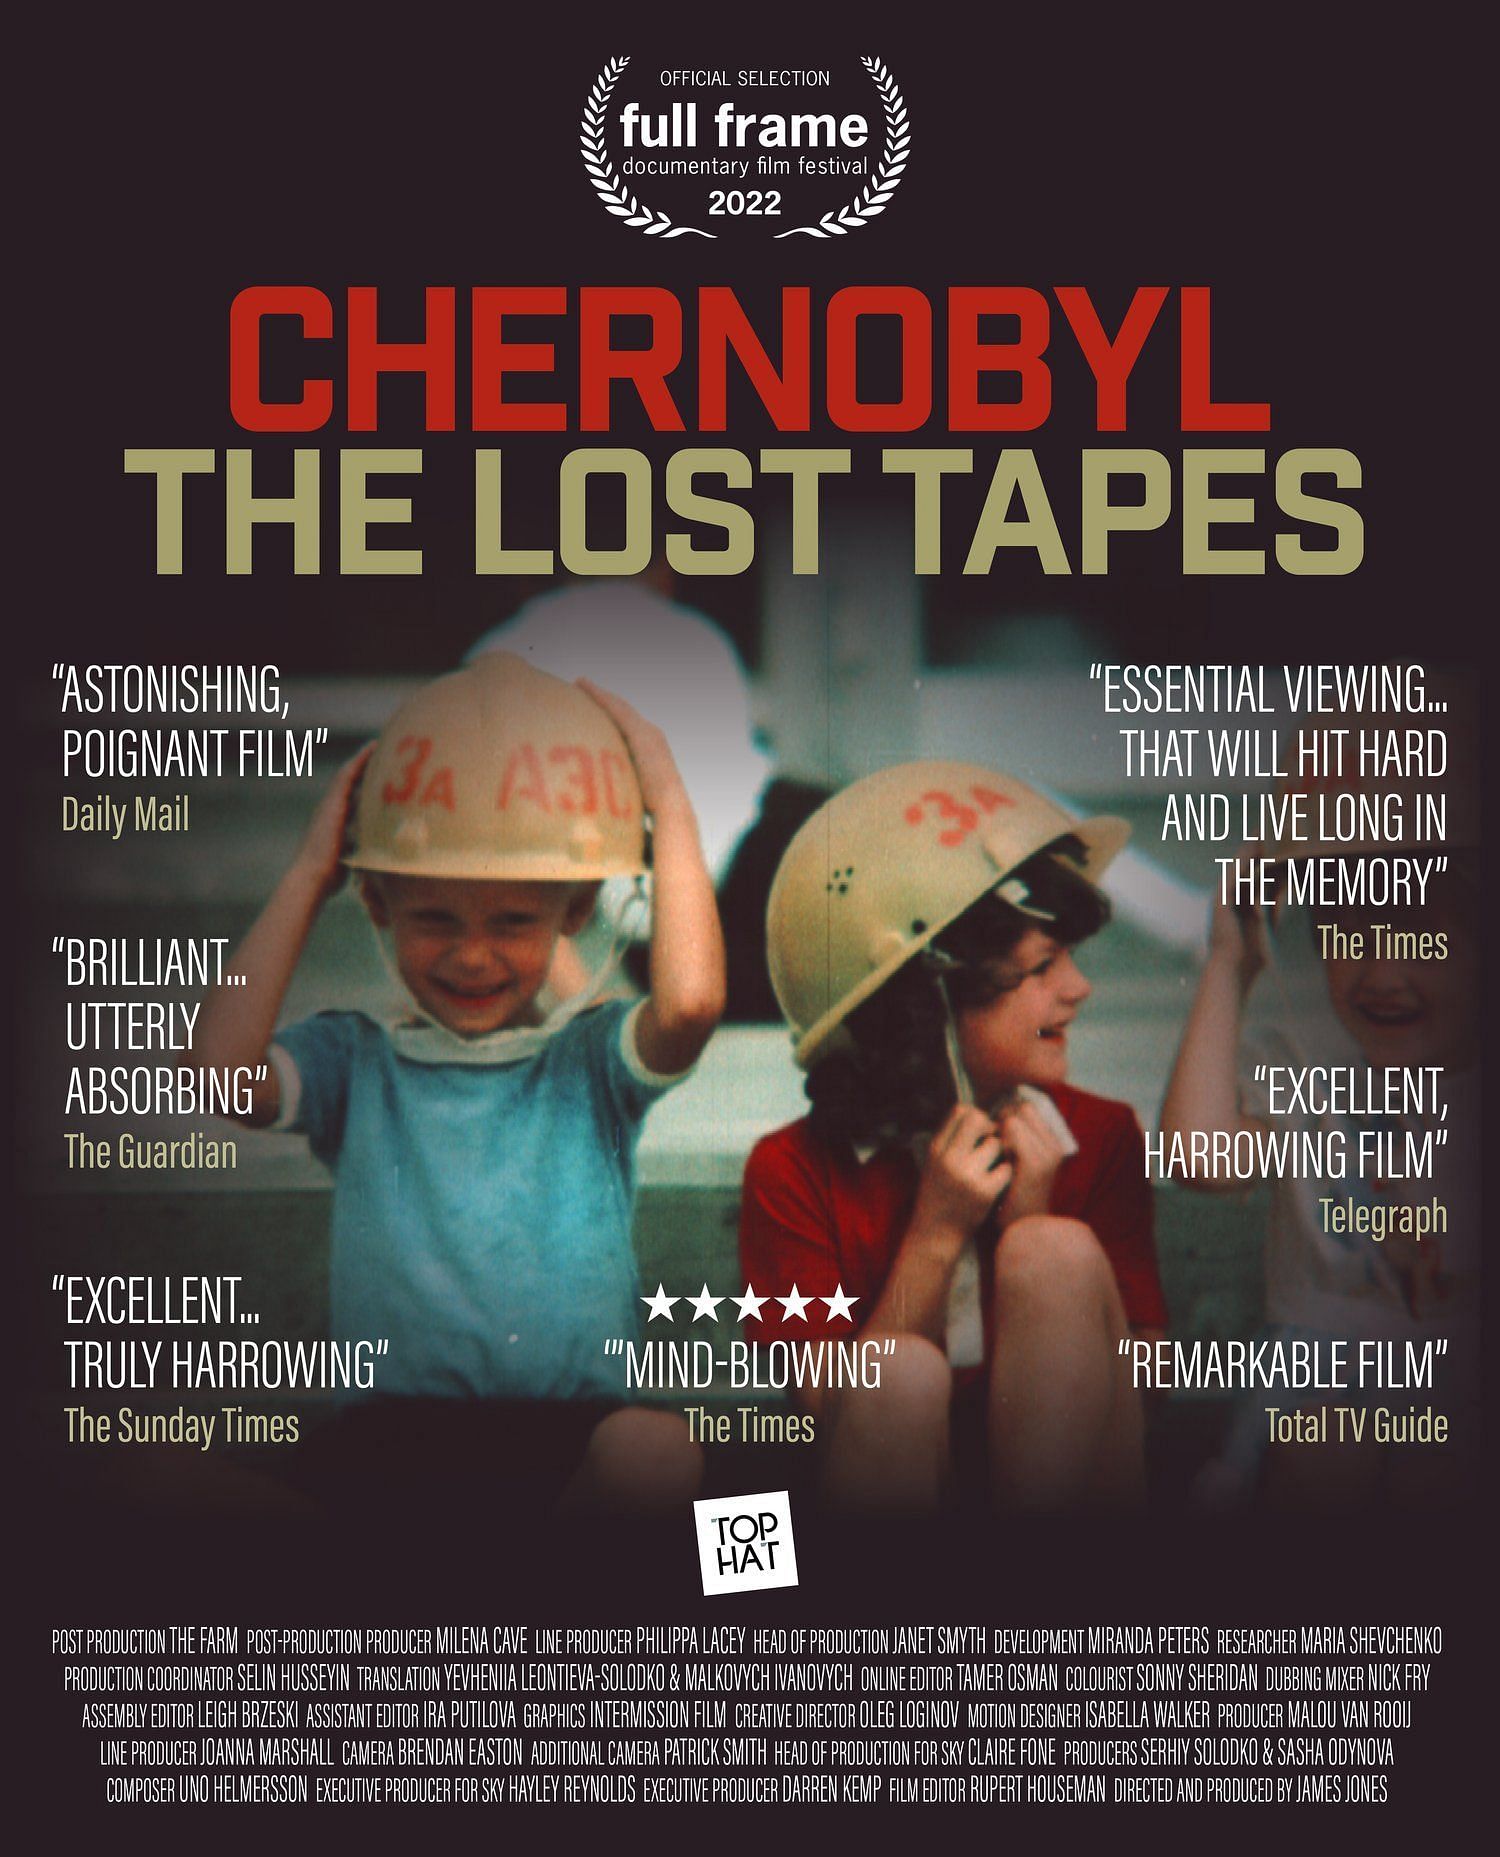 Chernobyl: The Lost Tapes (Image via HBO)